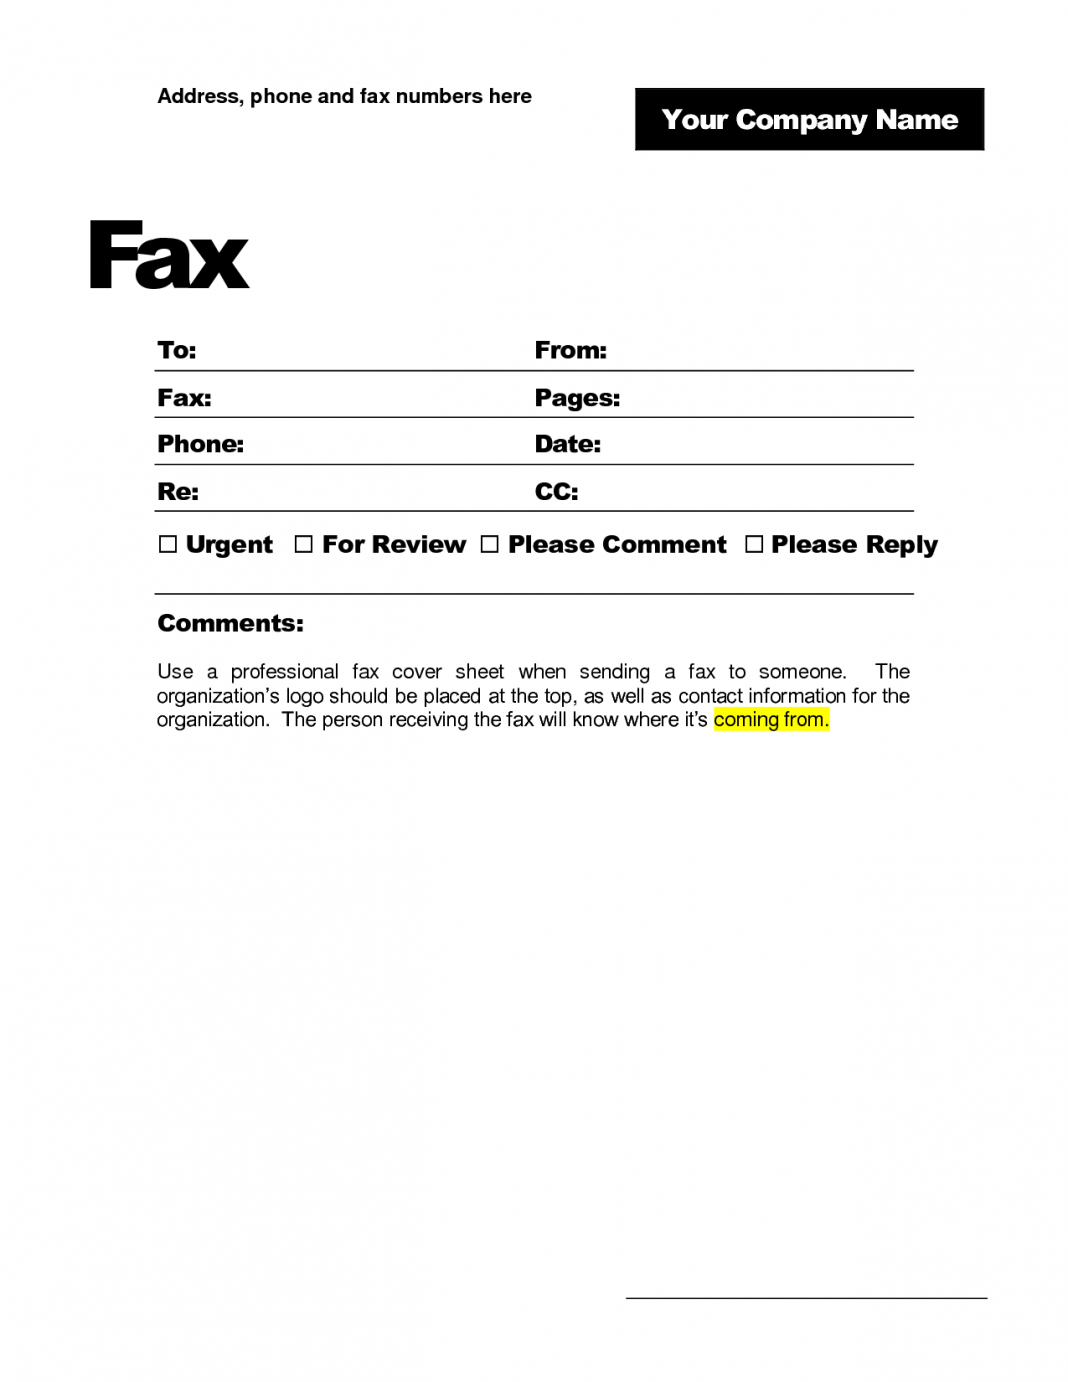 Fax Cover Sheet Plate Word Spreadsheet Examples Page Free Within Fax Template Word 2010